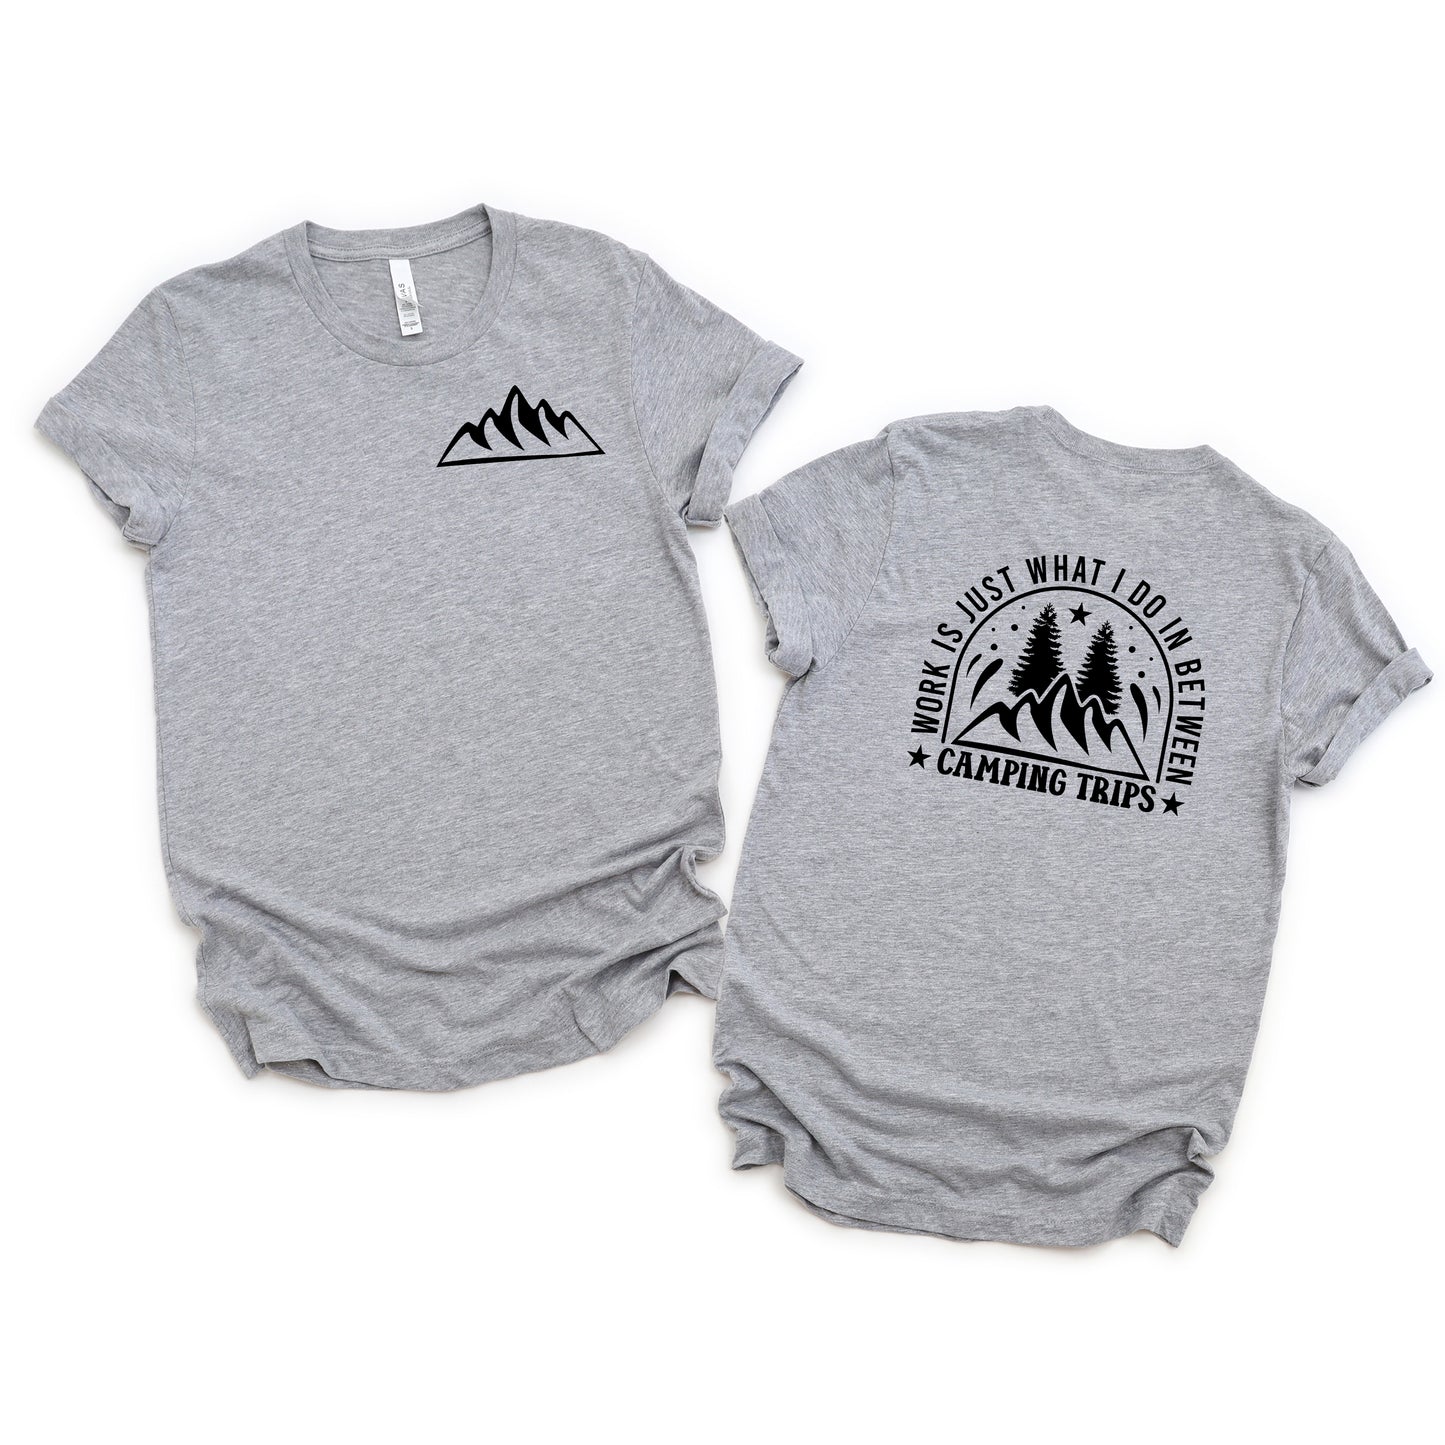 Work Between Camping Trips | Front & Back Short Sleeve Graphic Tee